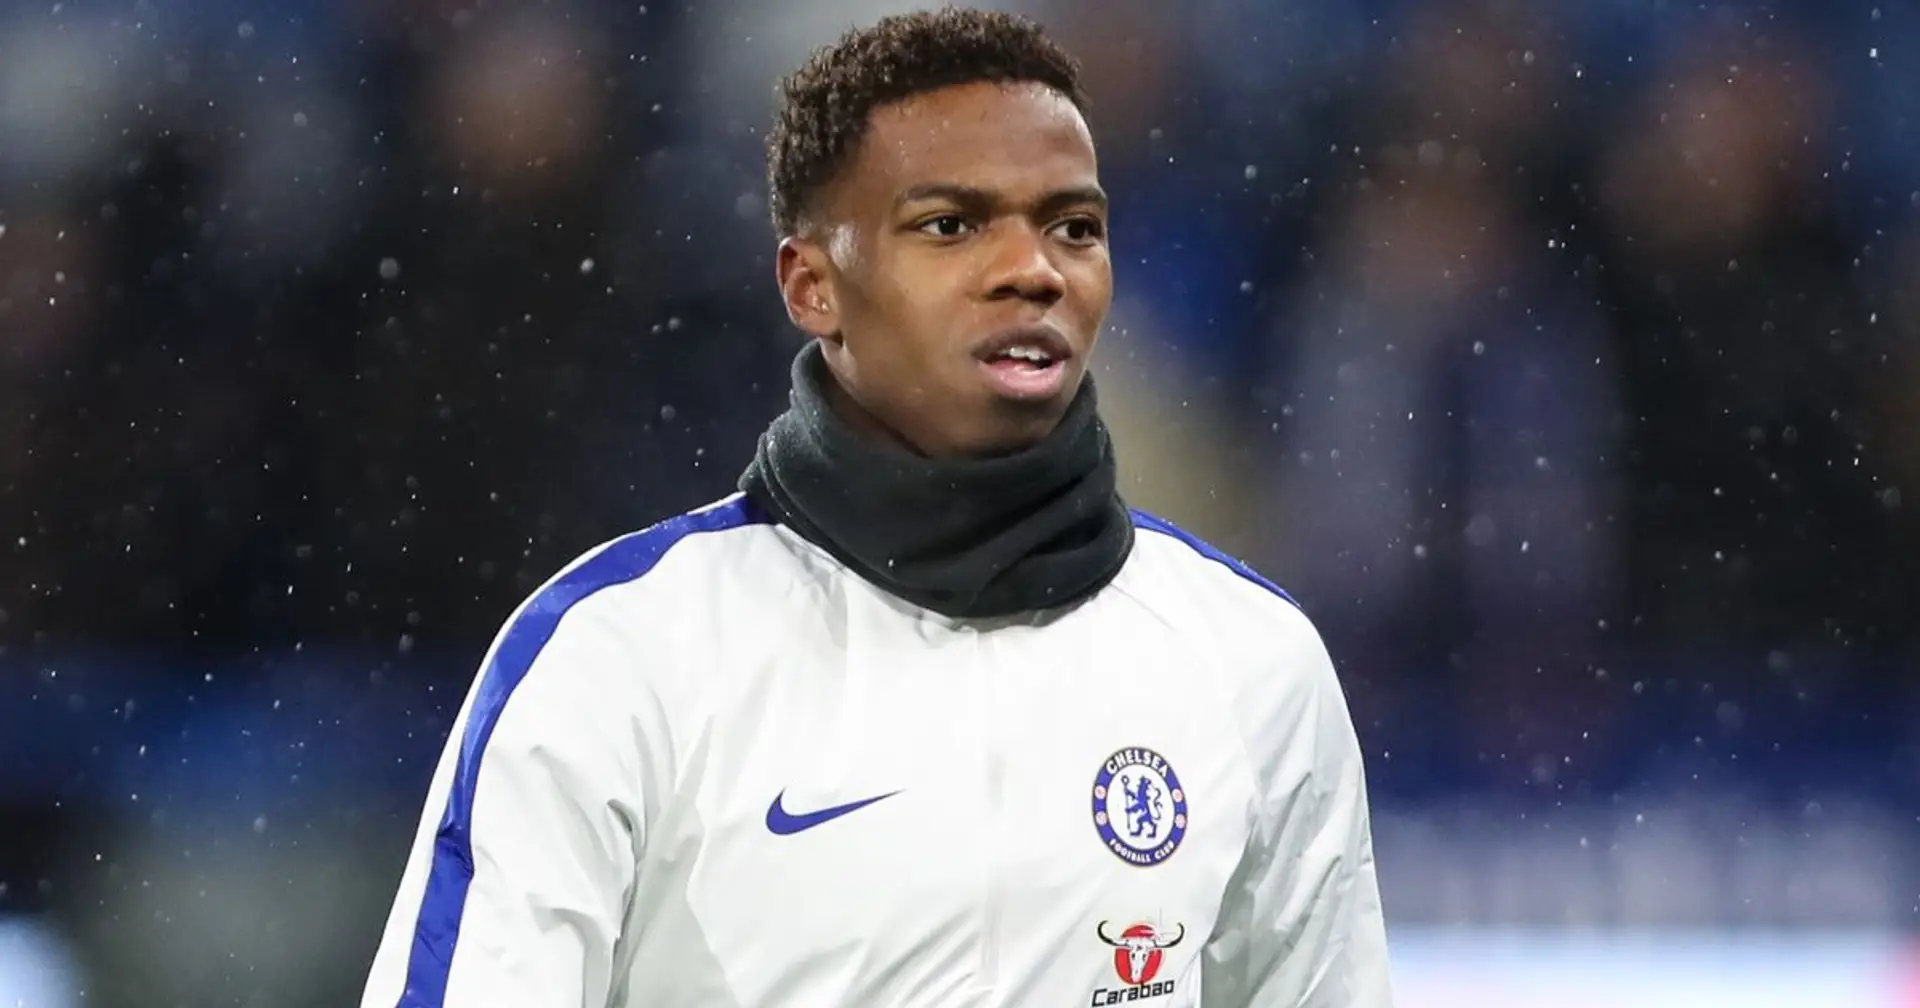 'It would be an incredible comeback': Charly Musonda opens up on horrific injury and outlines plan for return